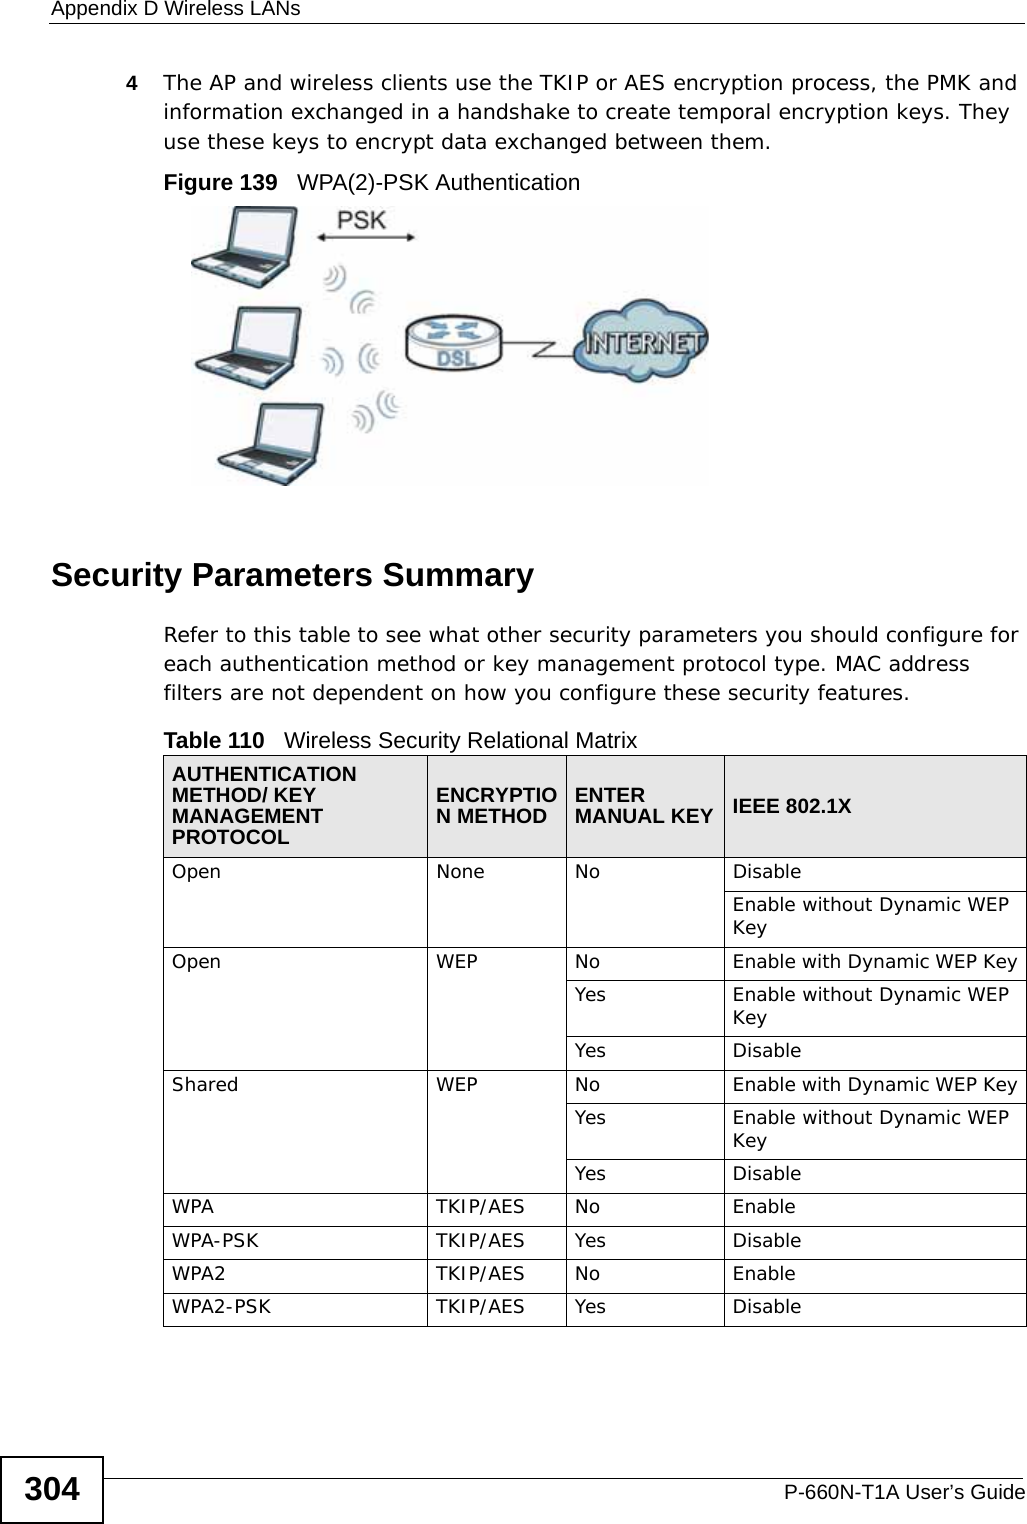 Appendix D Wireless LANsP-660N-T1A User’s Guide3044The AP and wireless clients use the TKIP or AES encryption process, the PMK and information exchanged in a handshake to create temporal encryption keys. They use these keys to encrypt data exchanged between them.Figure 139   WPA(2)-PSK AuthenticationSecurity Parameters SummaryRefer to this table to see what other security parameters you should configure for each authentication method or key management protocol type. MAC address filters are not dependent on how you configure these security features.Table 110   Wireless Security Relational MatrixAUTHENTICATION METHOD/ KEY MANAGEMENT PROTOCOLENCRYPTION METHOD ENTER MANUAL KEY IEEE 802.1XOpen None No DisableEnable without Dynamic WEP KeyOpen WEP No           Enable with Dynamic WEP KeyYes Enable without Dynamic WEP KeyYes DisableShared WEP  No           Enable with Dynamic WEP KeyYes Enable without Dynamic WEP KeyYes DisableWPA  TKIP/AES No EnableWPA-PSK  TKIP/AES Yes DisableWPA2 TKIP/AES No EnableWPA2-PSK  TKIP/AES Yes Disable